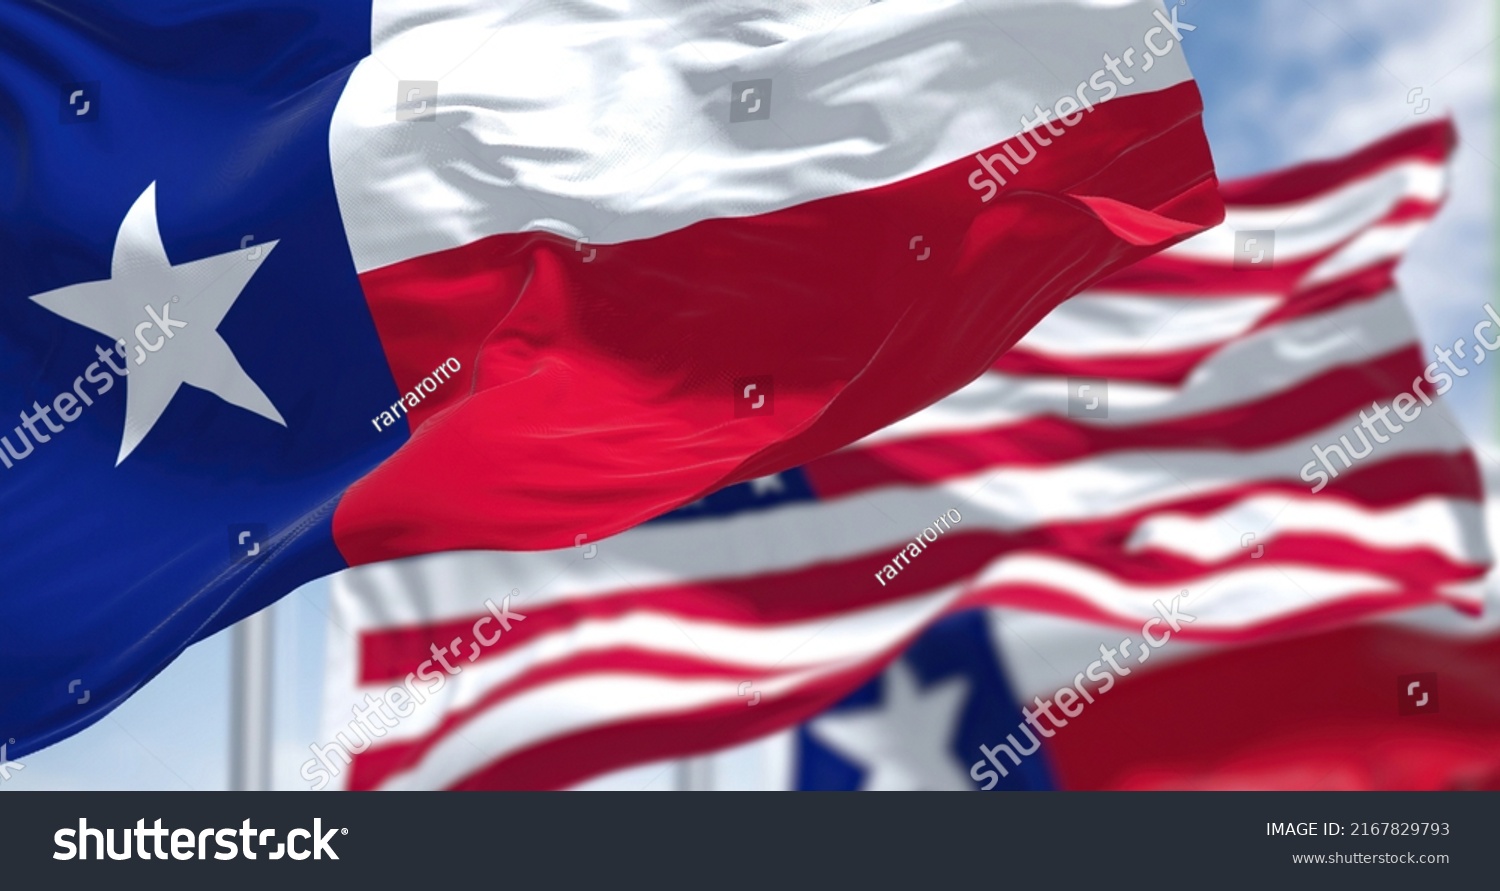 The Texas state flag waving along with the national flag of the United States of America. Texas s a state in the South Central region of the United States #2167829793